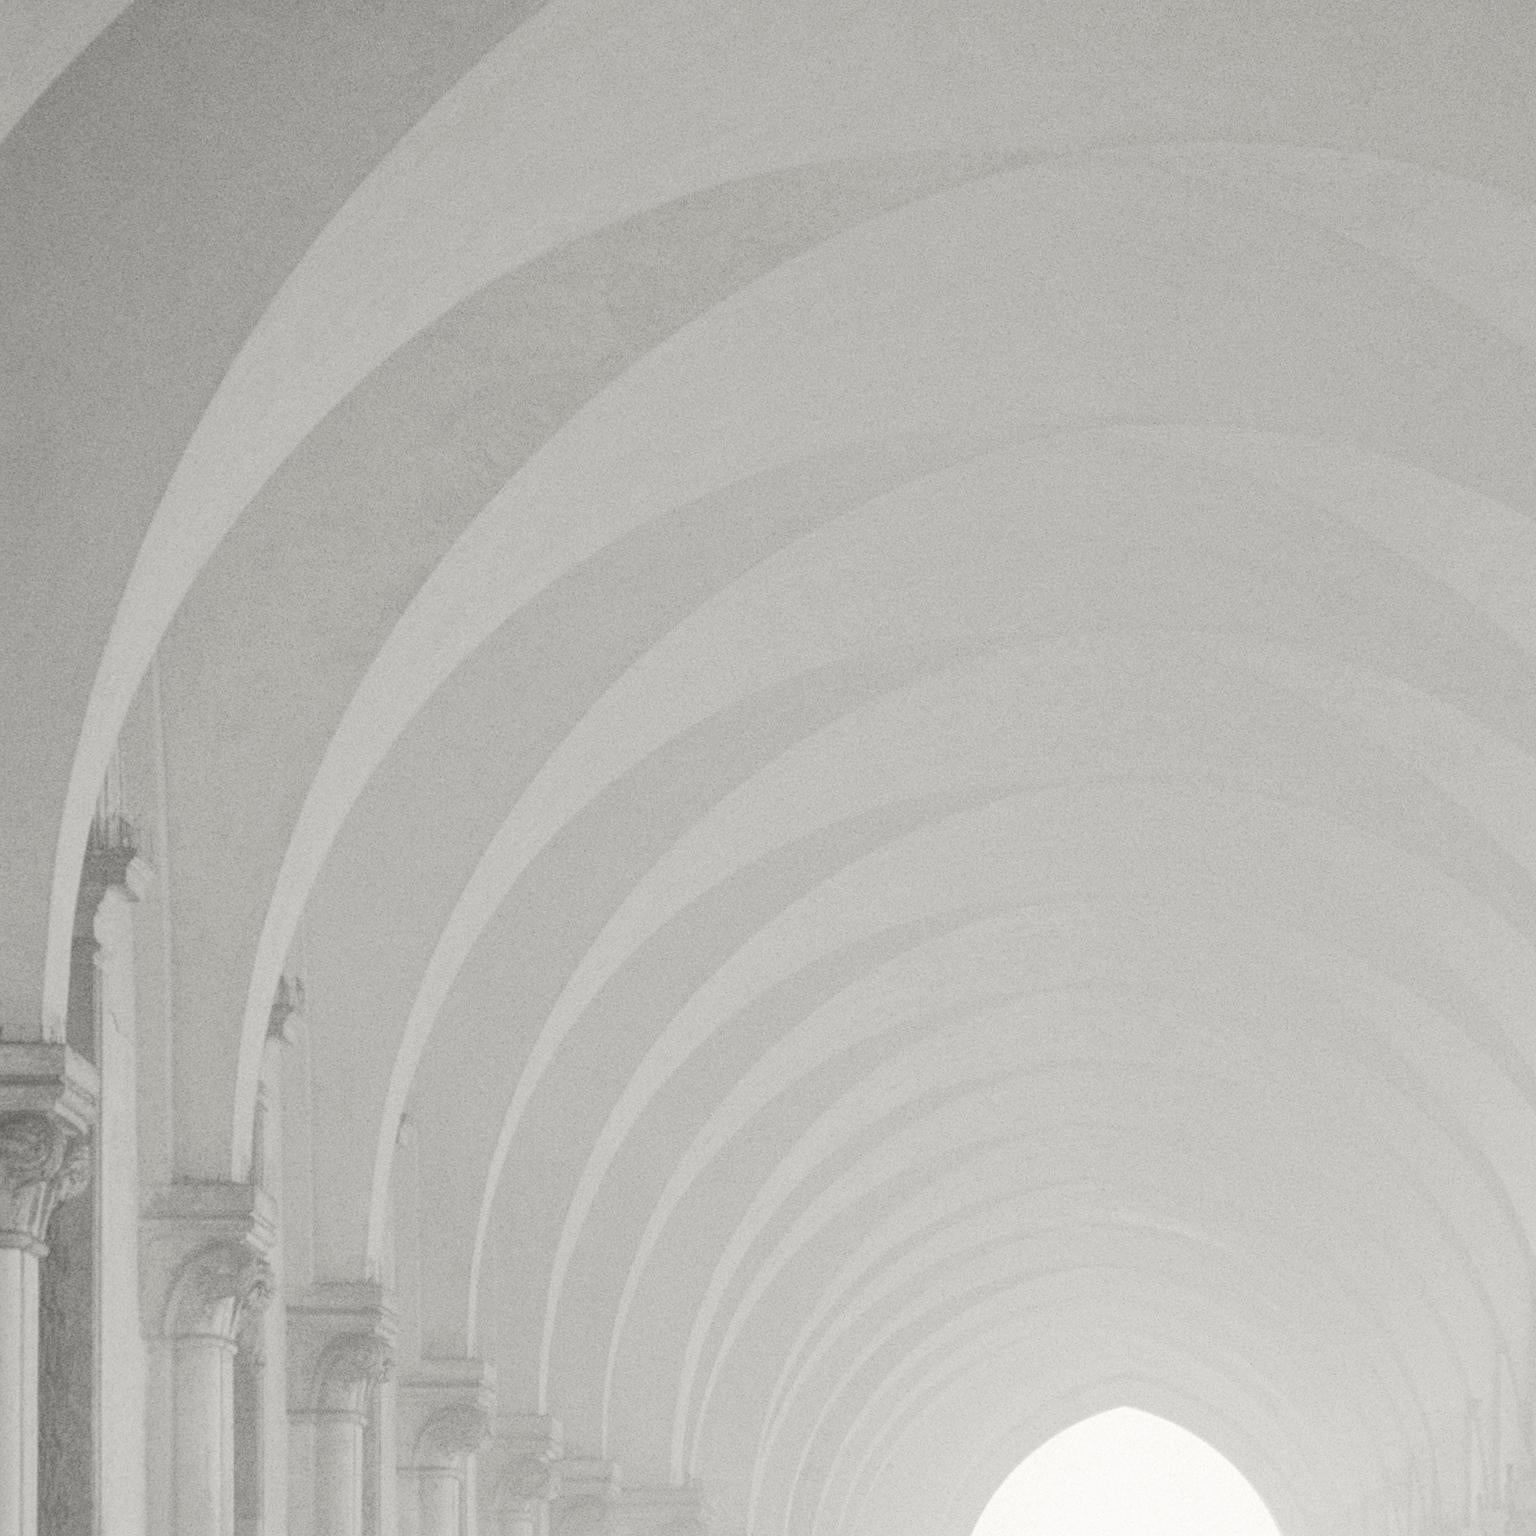 Columns and arches in misty fog, black and white.  Doges Palace, Venice, Italy 2 - Photograph by  Cosmo Condina